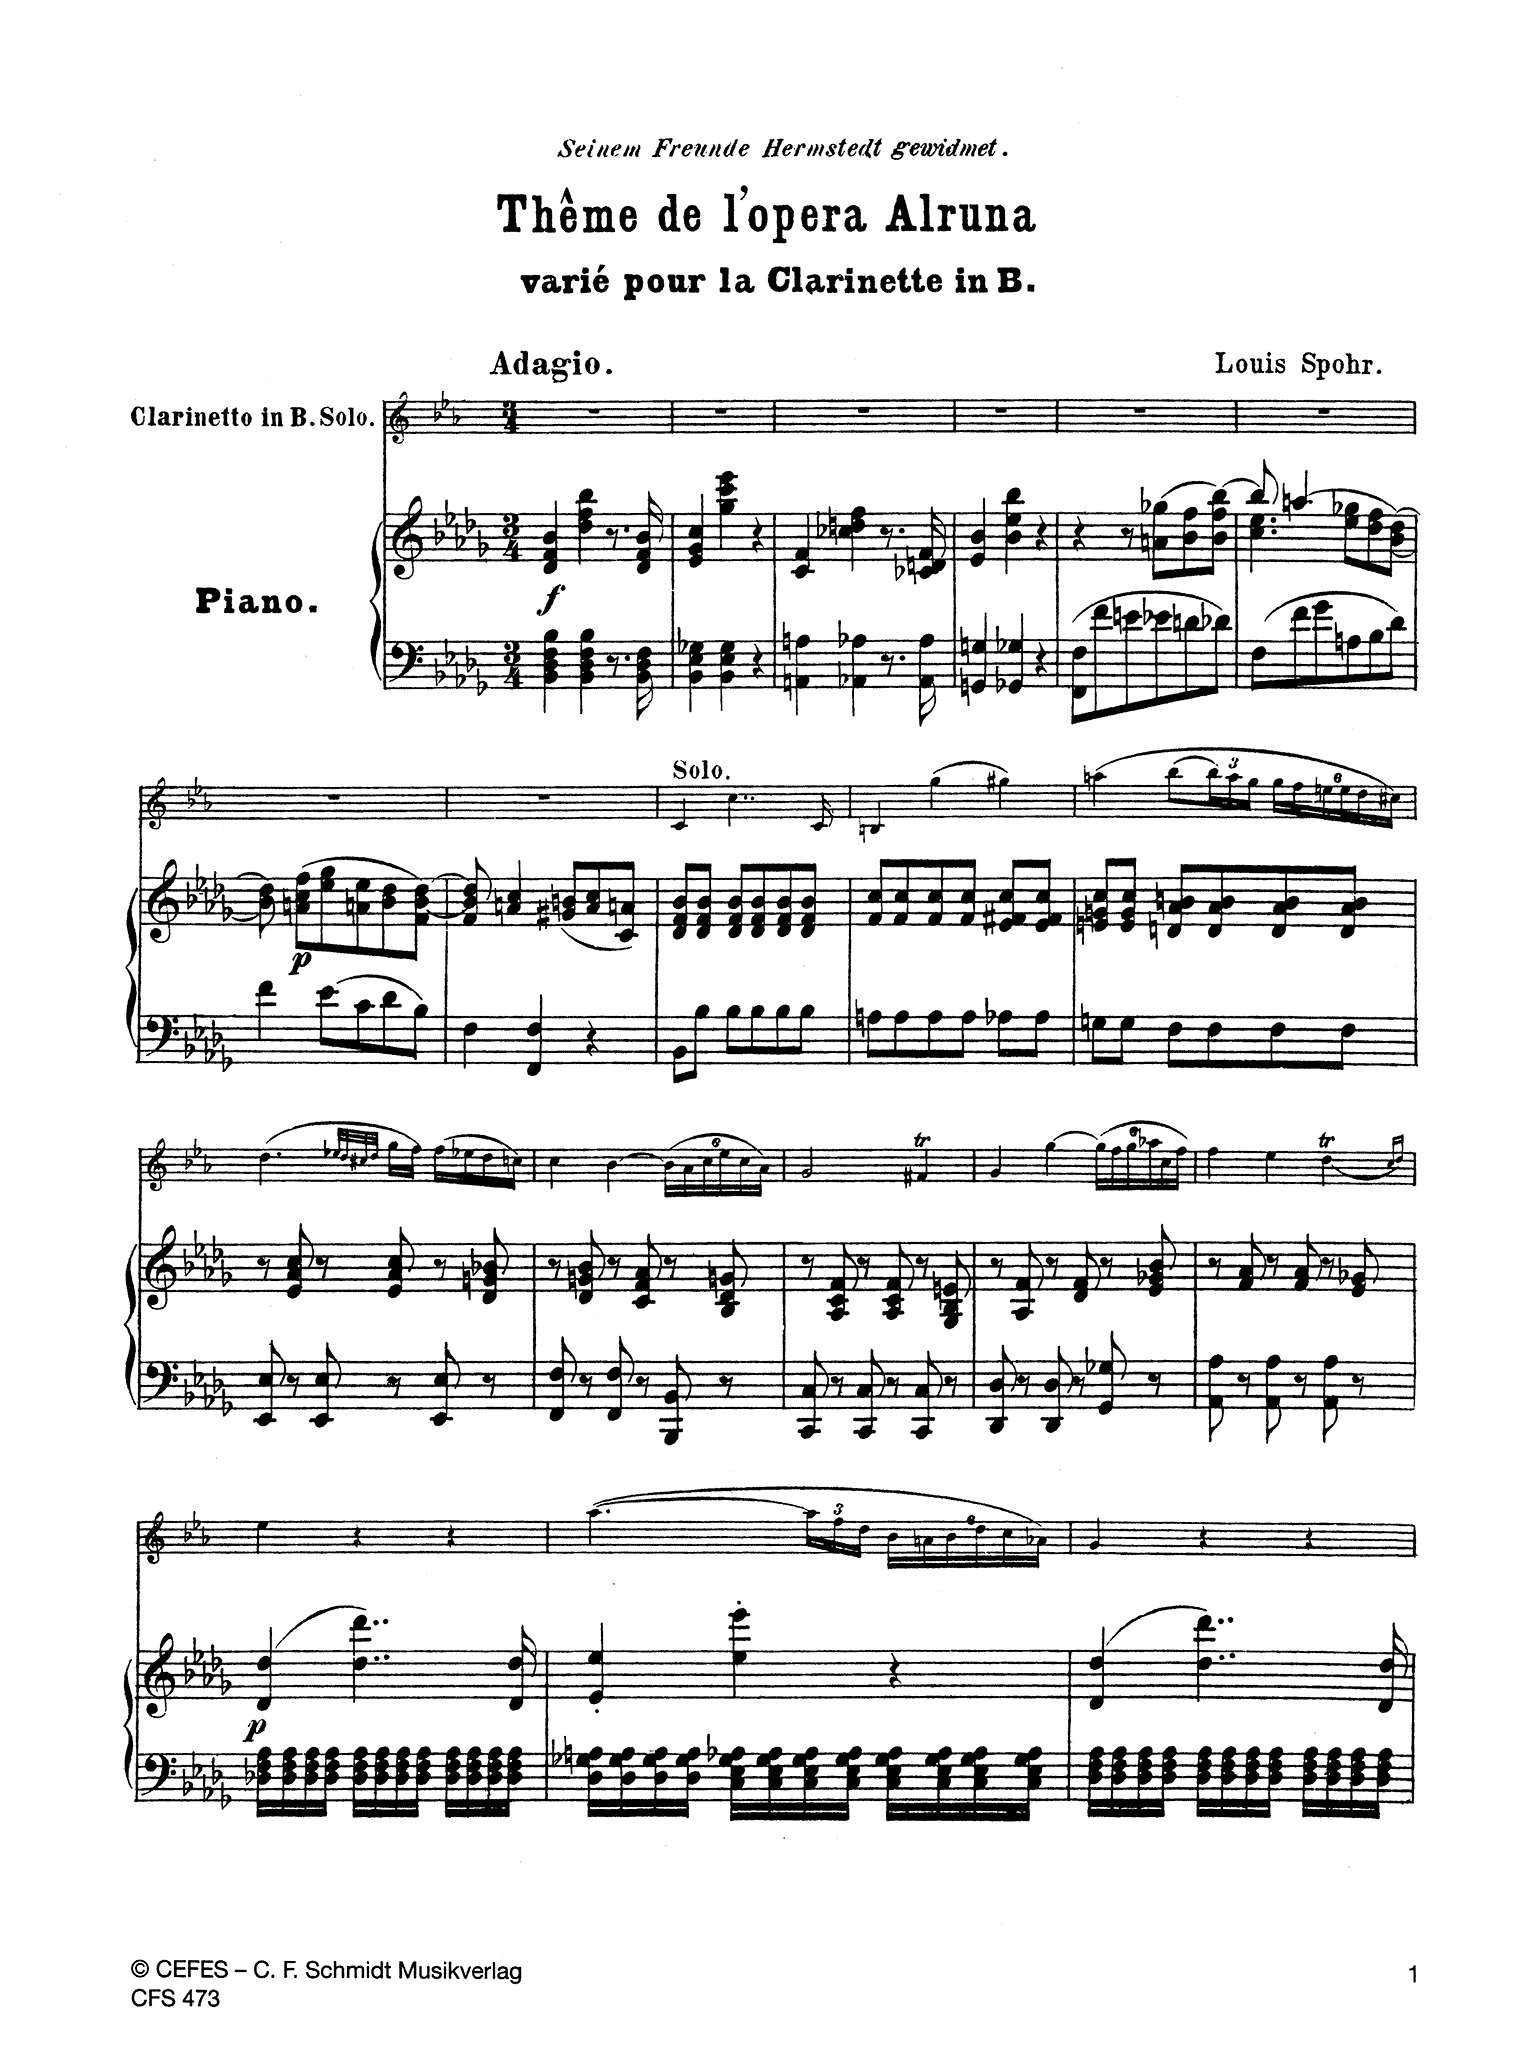 Spohr Variations on a Theme from 'Alruna,' WoO 15 clarinet and piano score